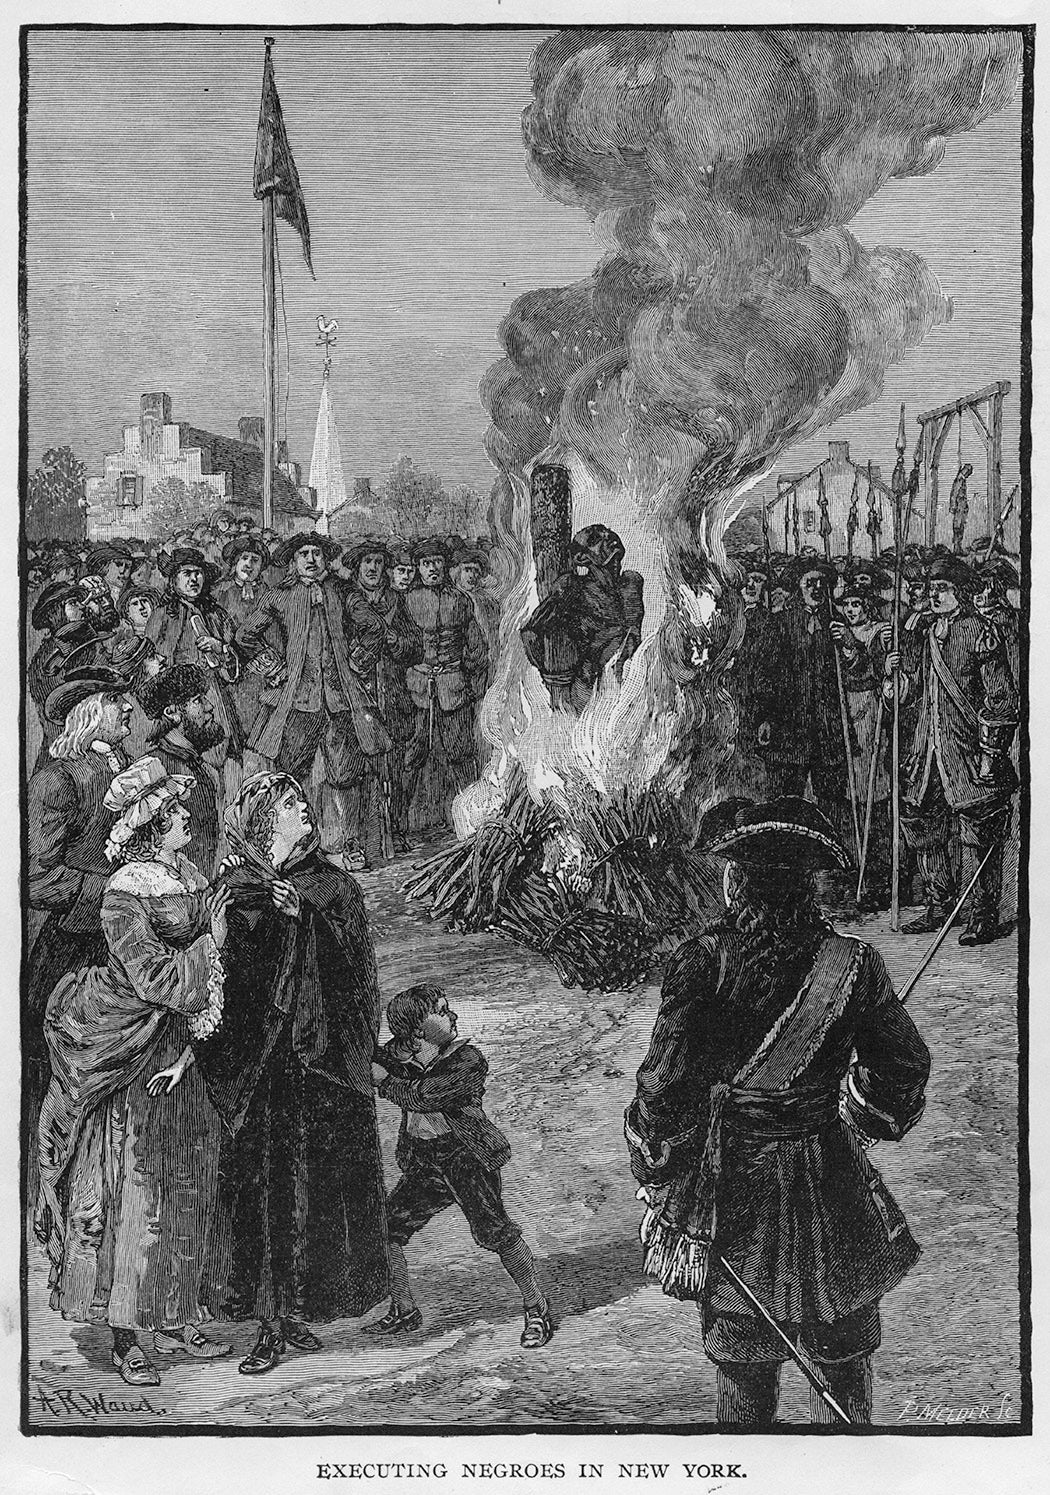 two black slaves are burnt at the stake, in New York City in 1741